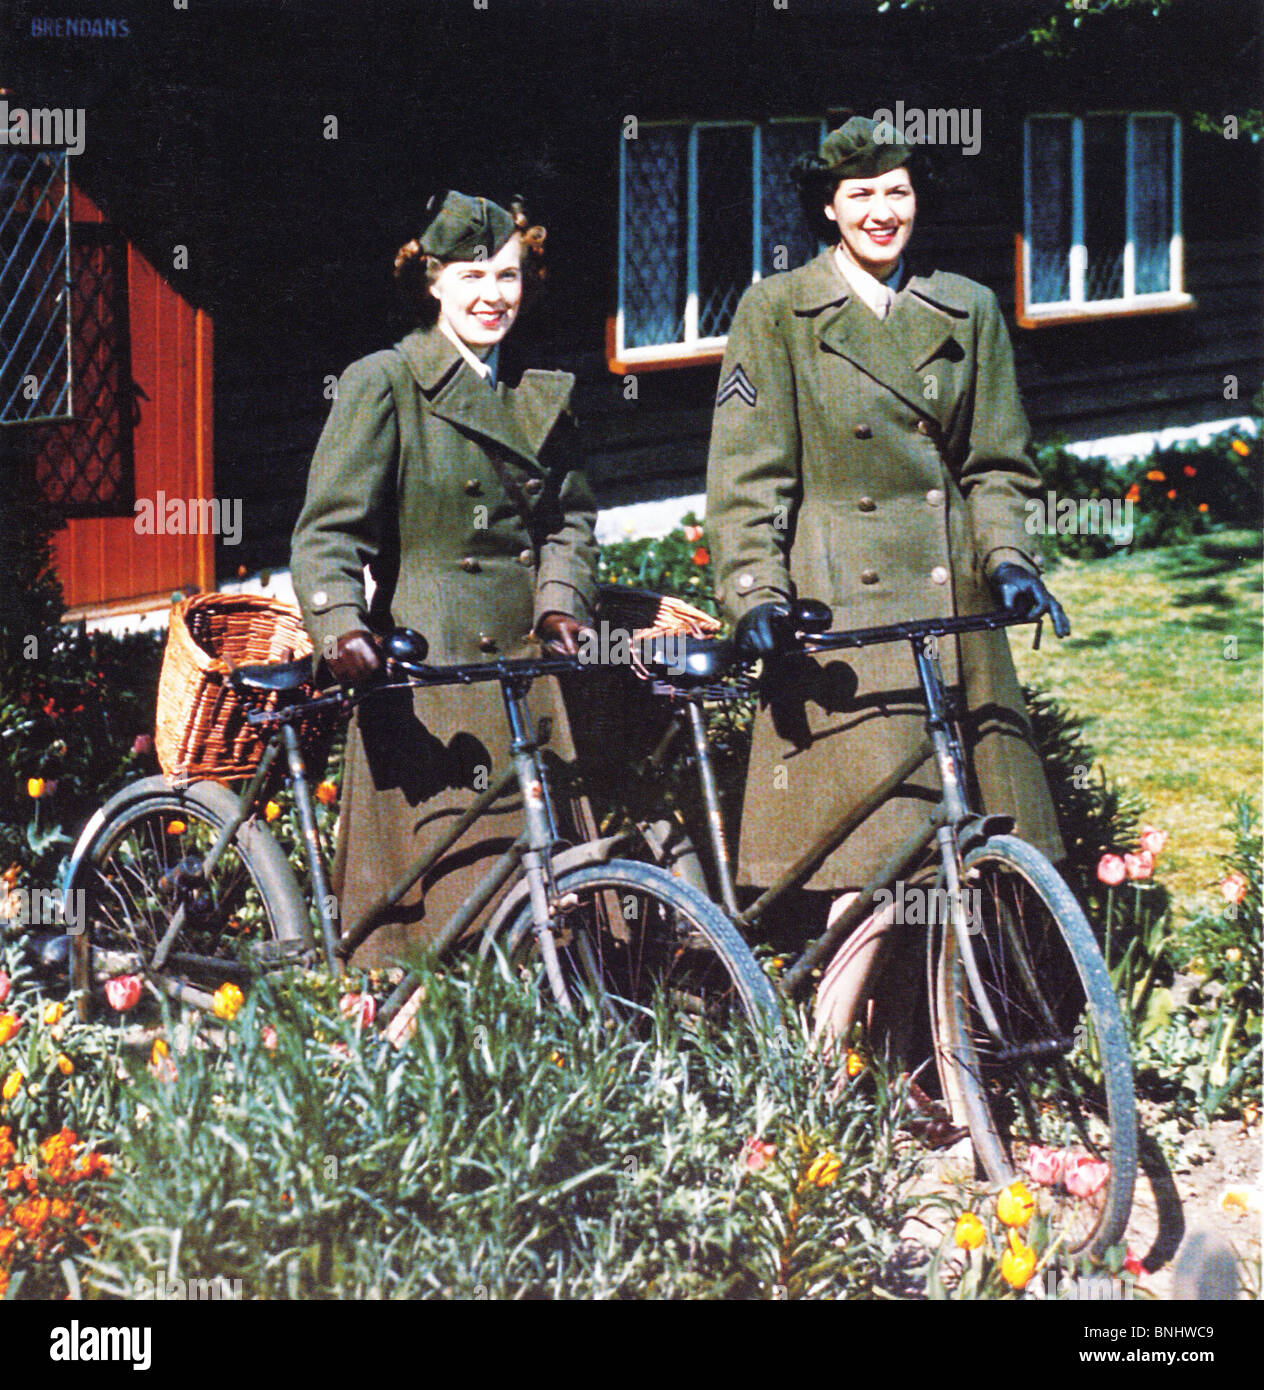 World War II Women’s Army Corps WAC US Army in England Great Britain Allied forces bicycles bikes women two woman uniform June Stock Photo